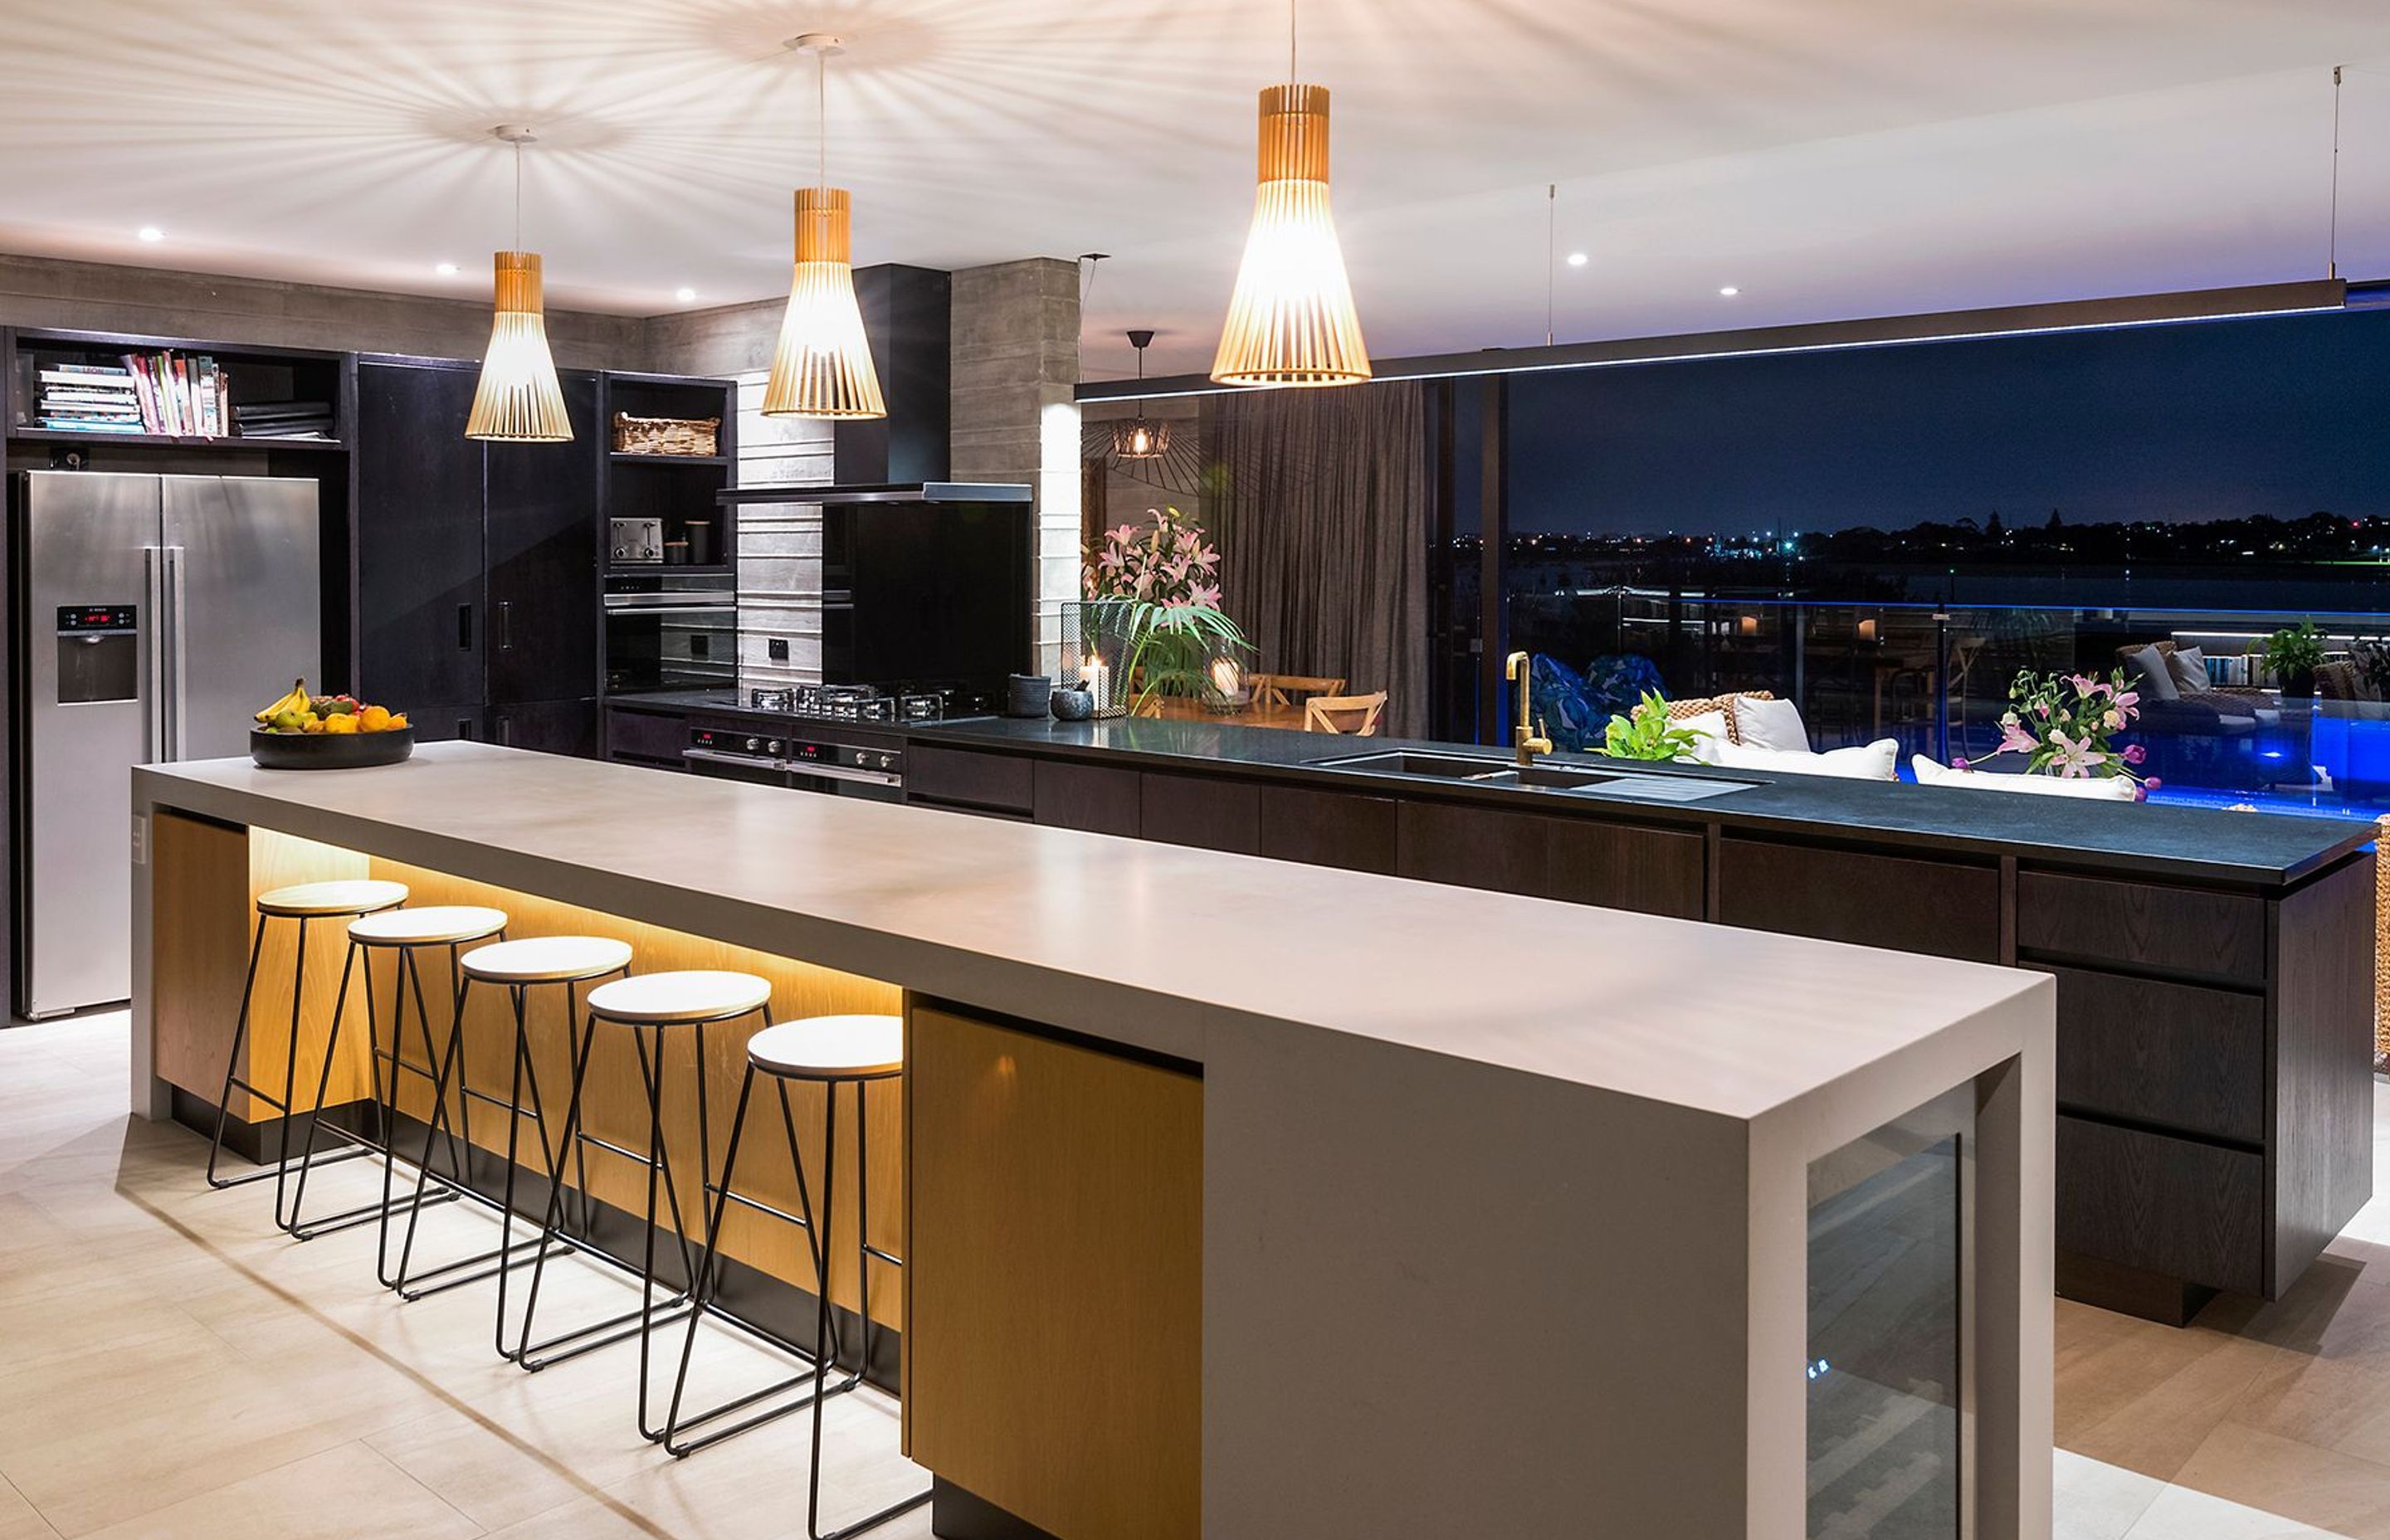 By night, the kitchen comes alive with feature lighting and a blue-lit pool as a backdrop.